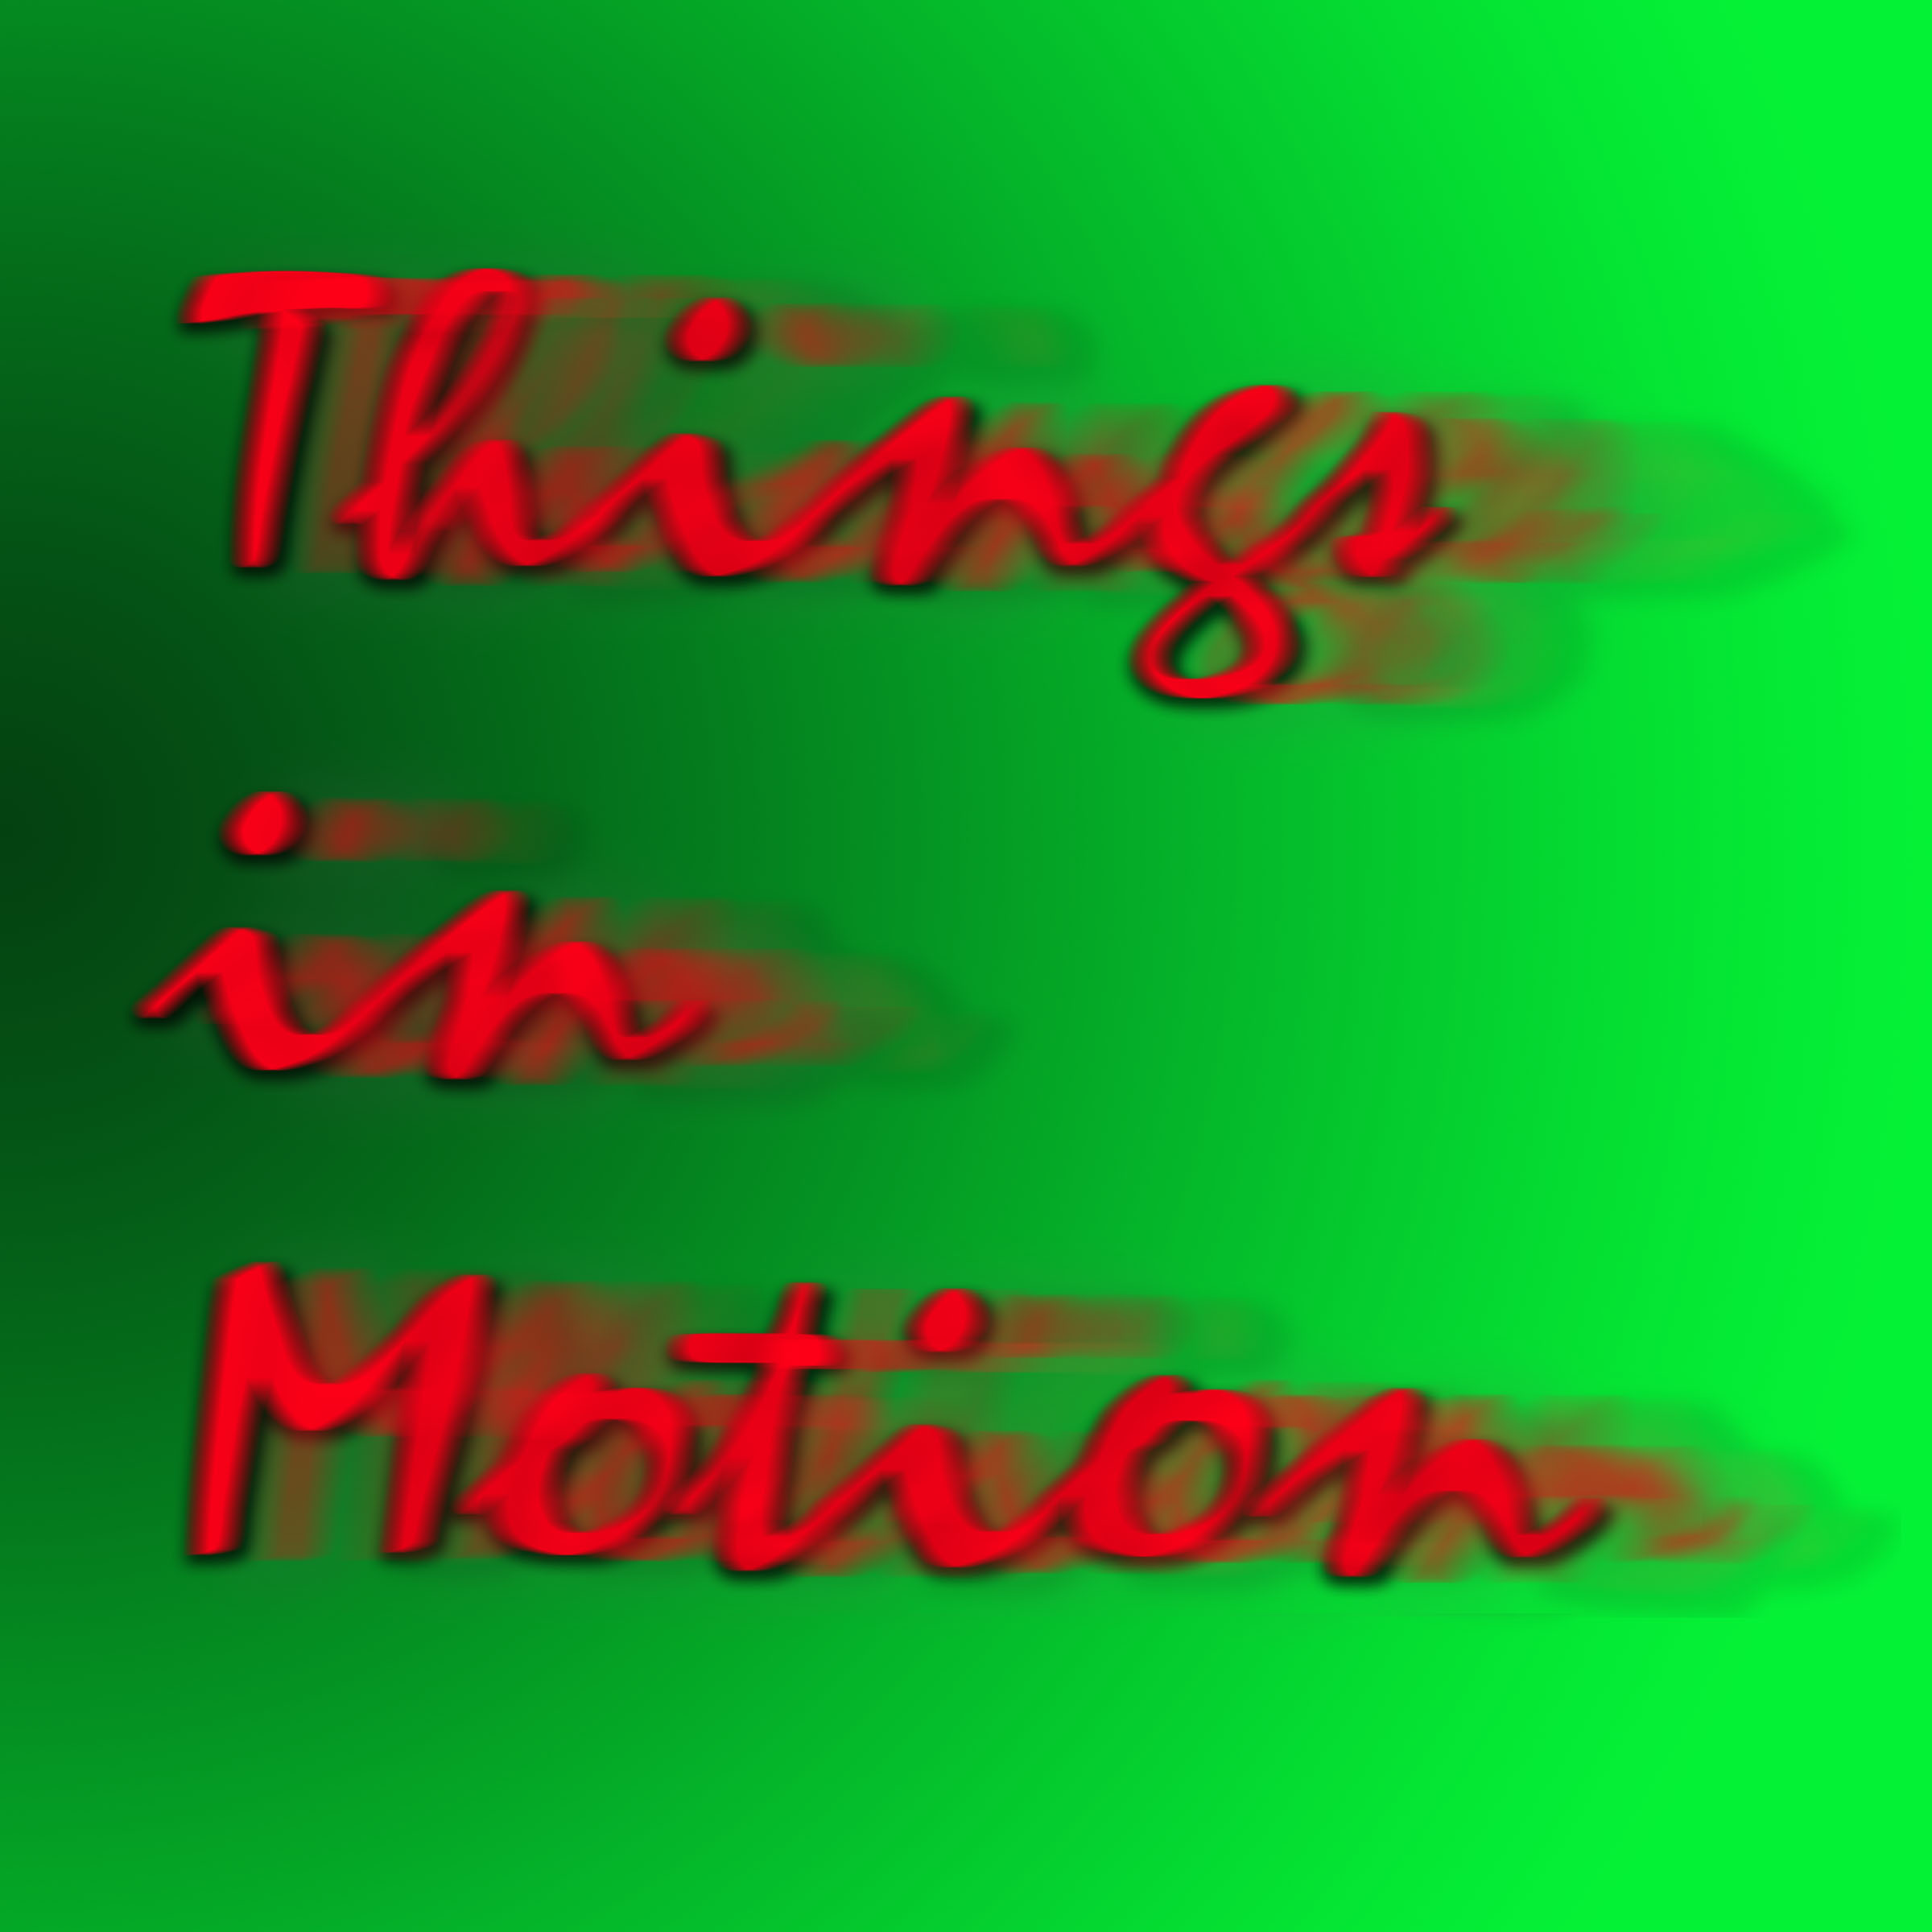 Challenge 8: Things in Motion